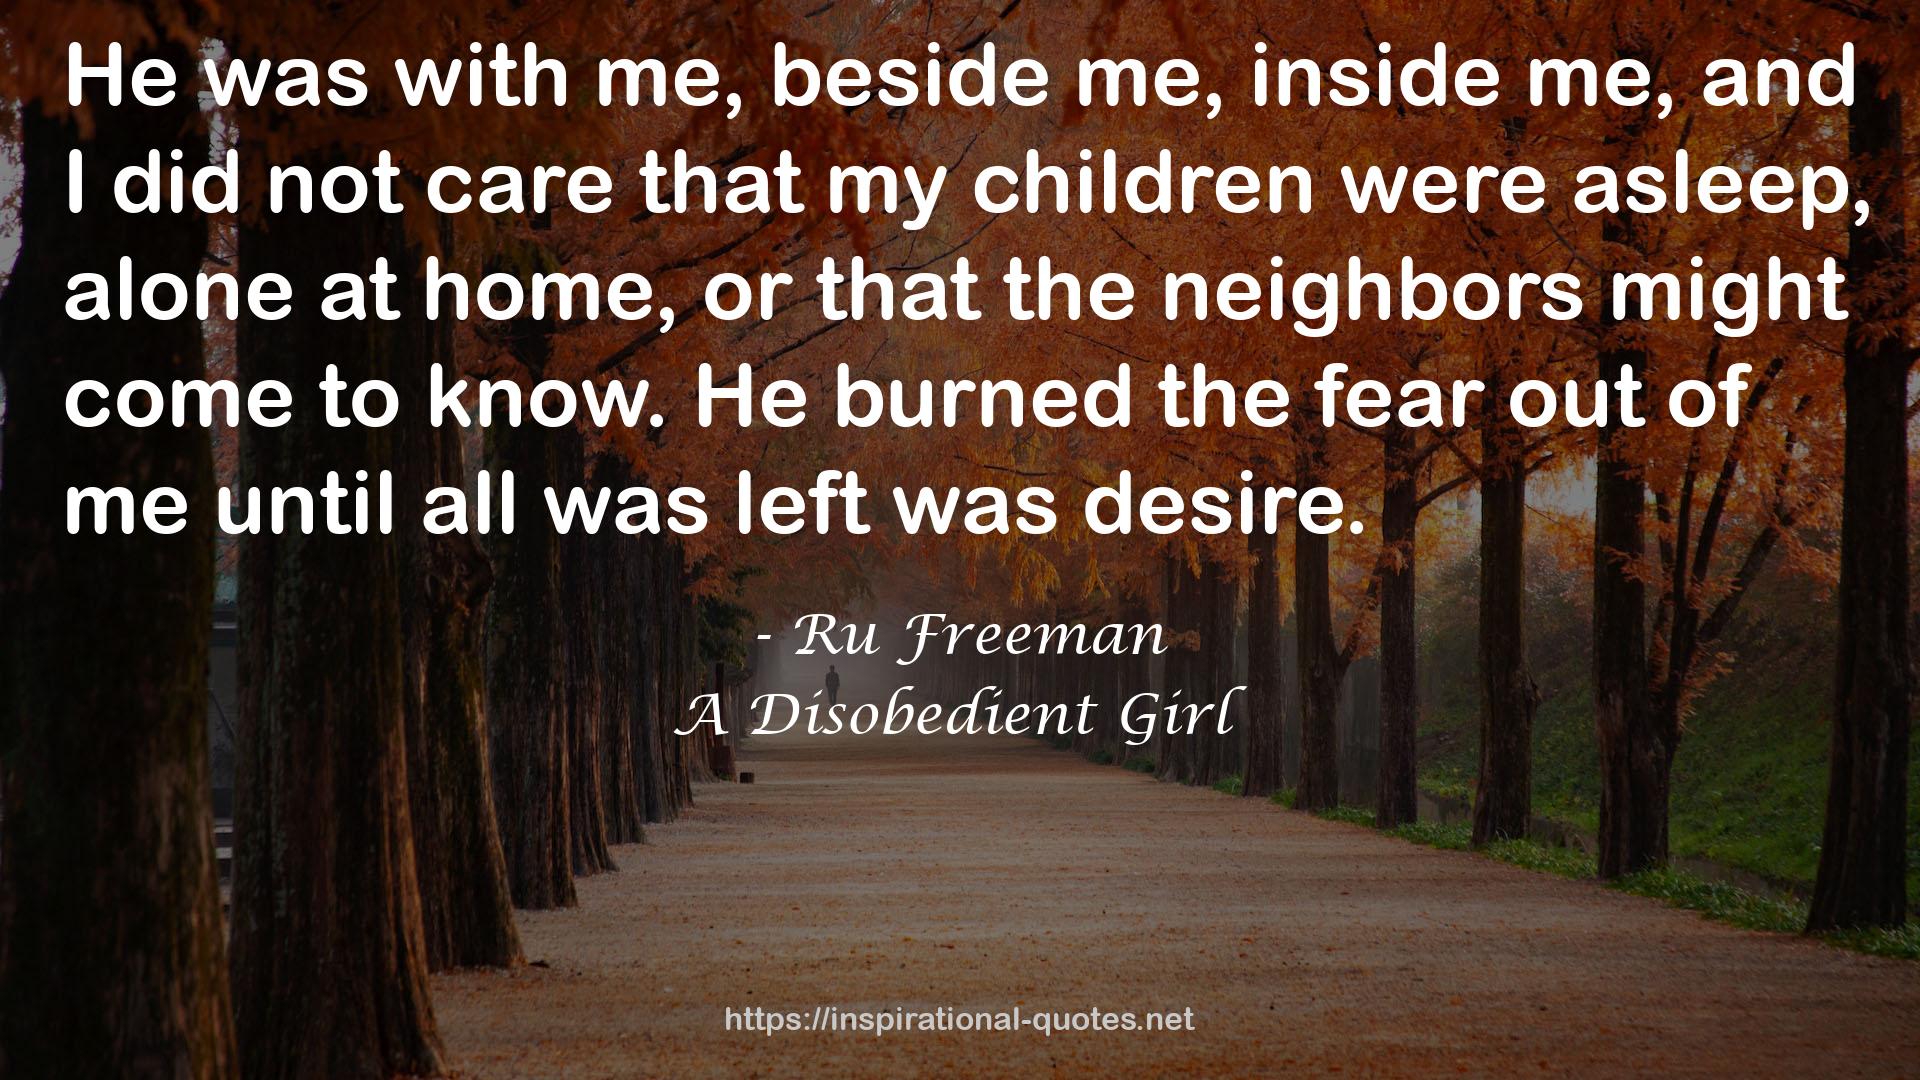 A Disobedient Girl QUOTES